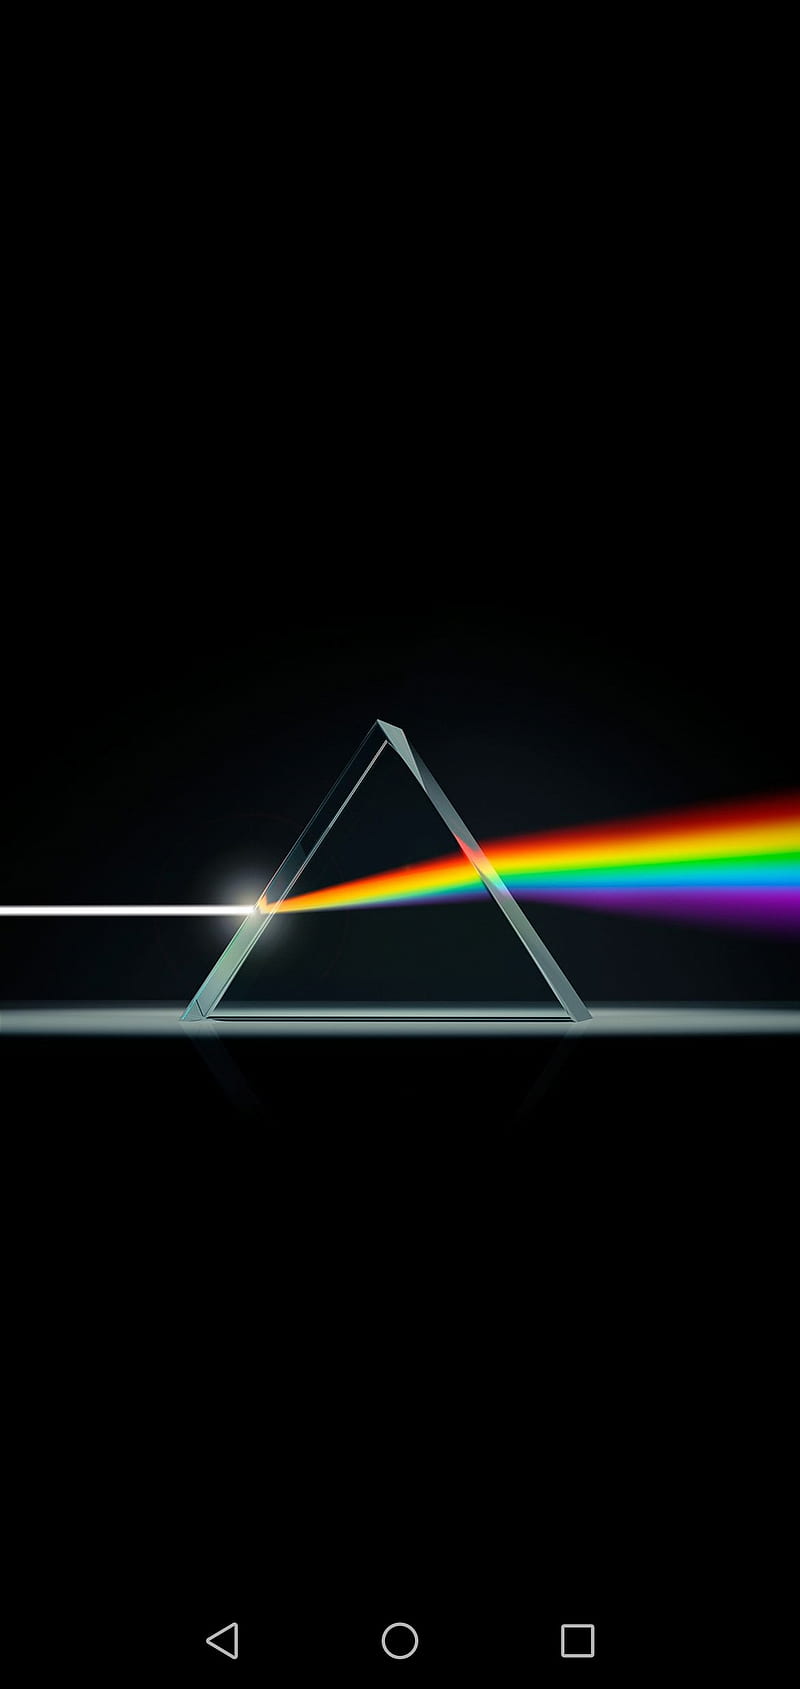 FOR IMMEDIATE RELEASE: Celebrate Pink Floyd's “Dark Side of the Moon” March  25th 3 pm to 6 pm local time in North America High End Audio Stores - On a  Higher Note